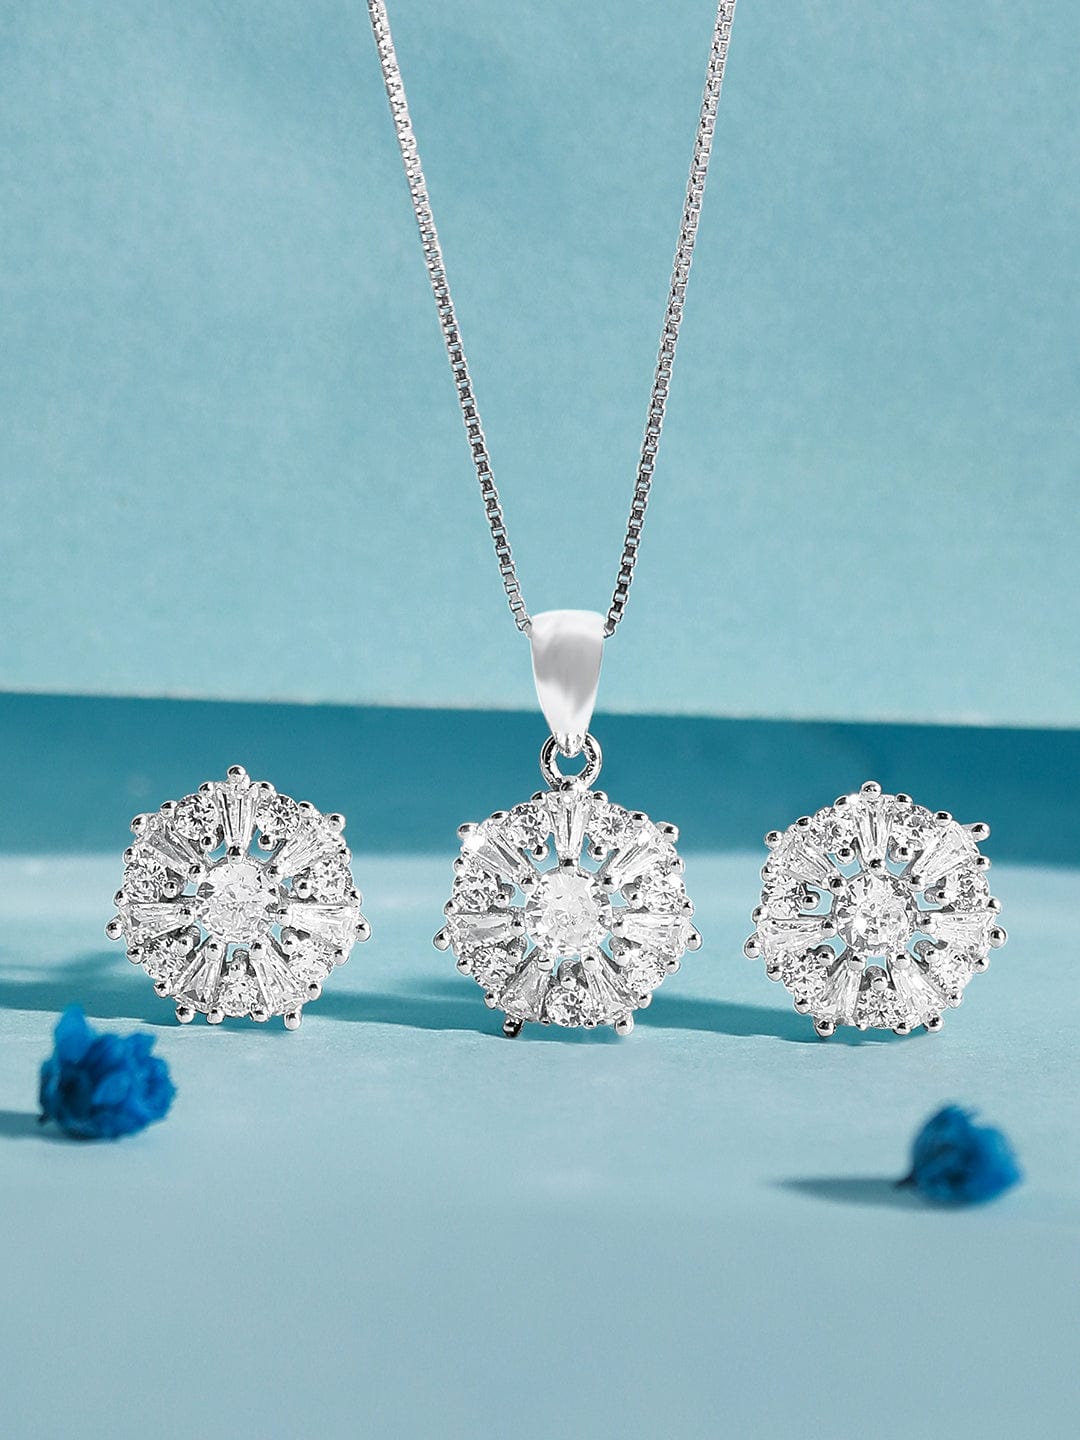 The Heptagon Of Zircons - Necklace Set Necklace Set